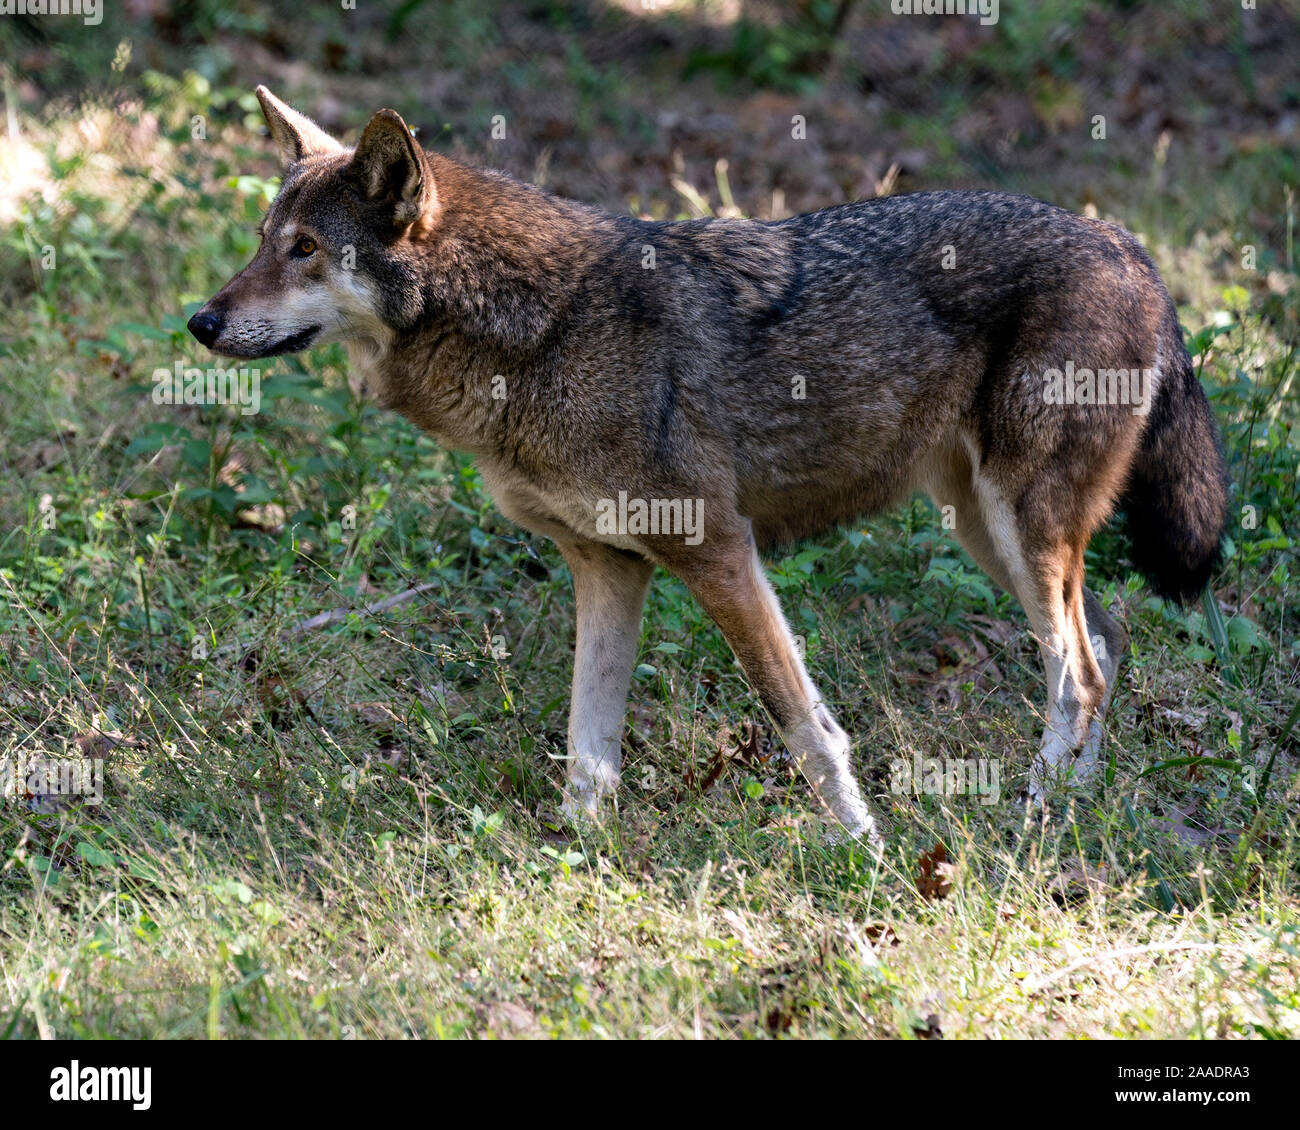 Wolf (Red Wolf) walking in the field with a close up viewing of its body, head, ears, eyes, nose, paws in its environment and surrounding. Stock Photo